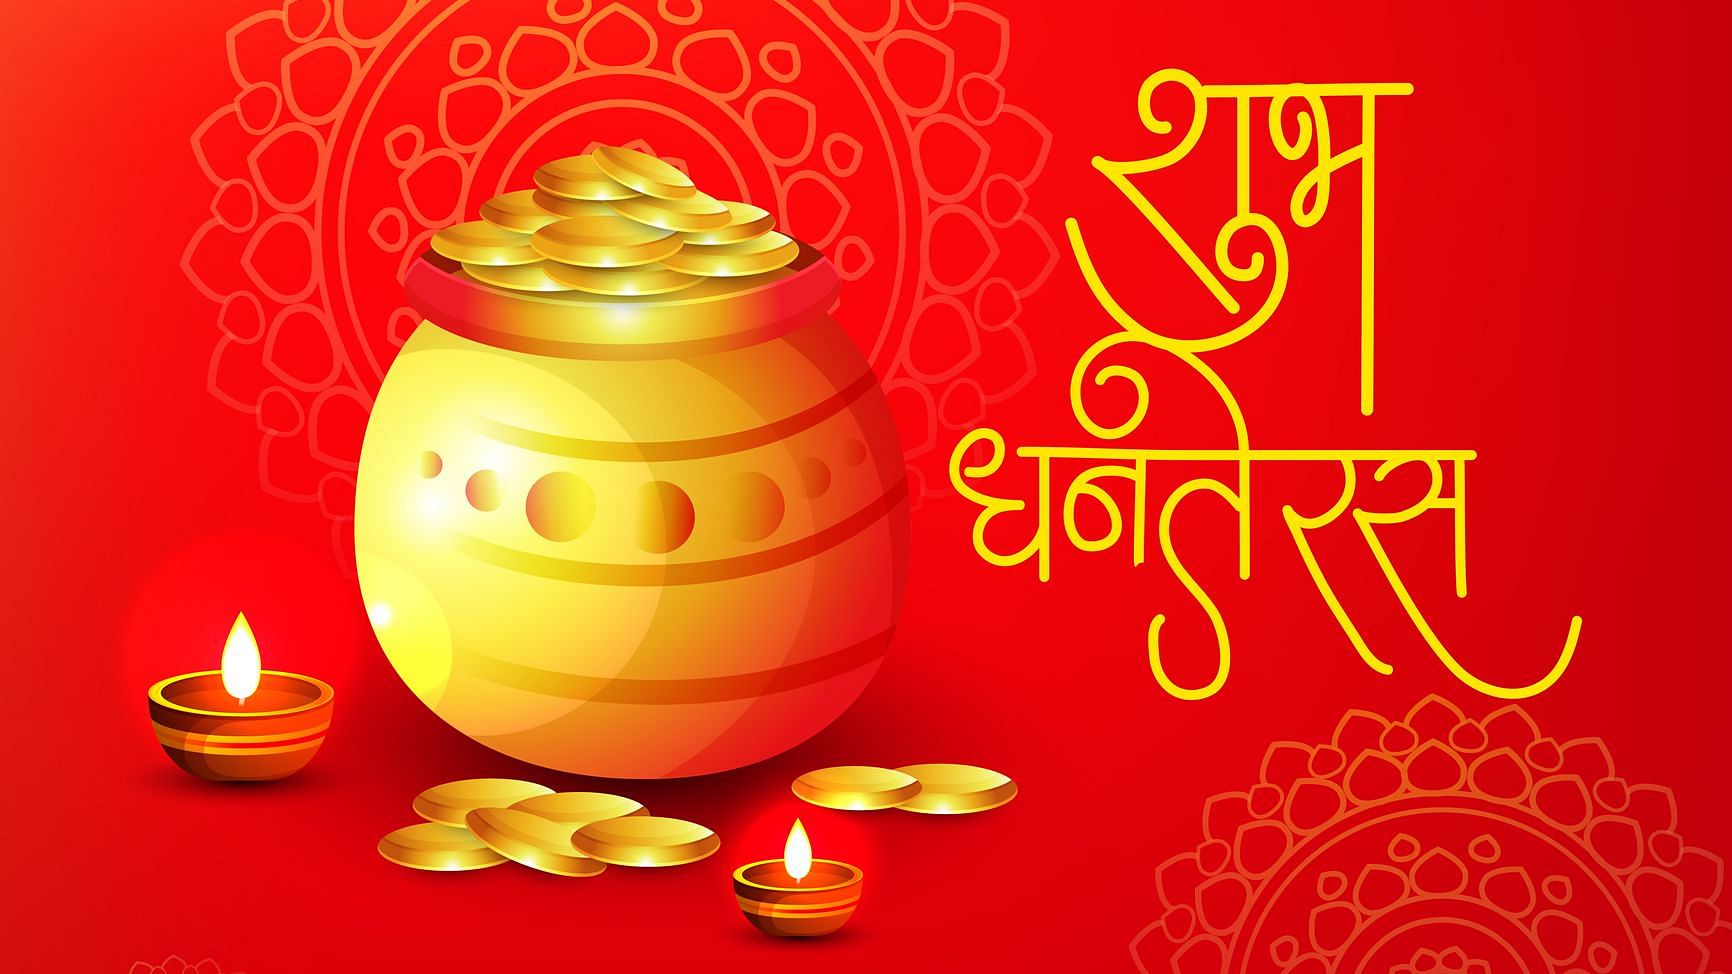 Happy Dhanteras Happy Dhanteras To All Of You Guys Here Are Some